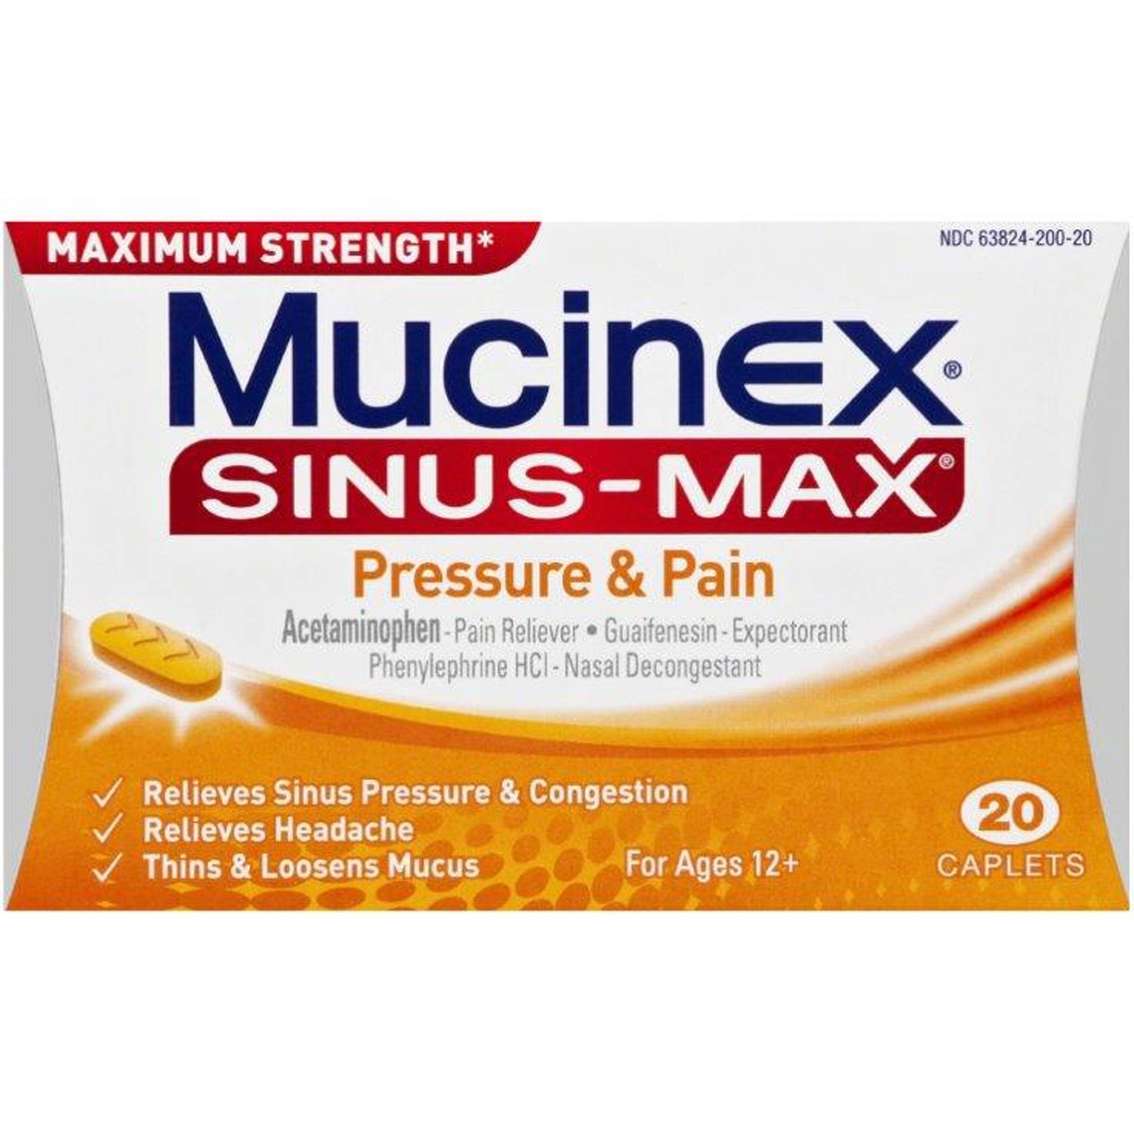 Can I Take Mucinex With Allergy Medicine